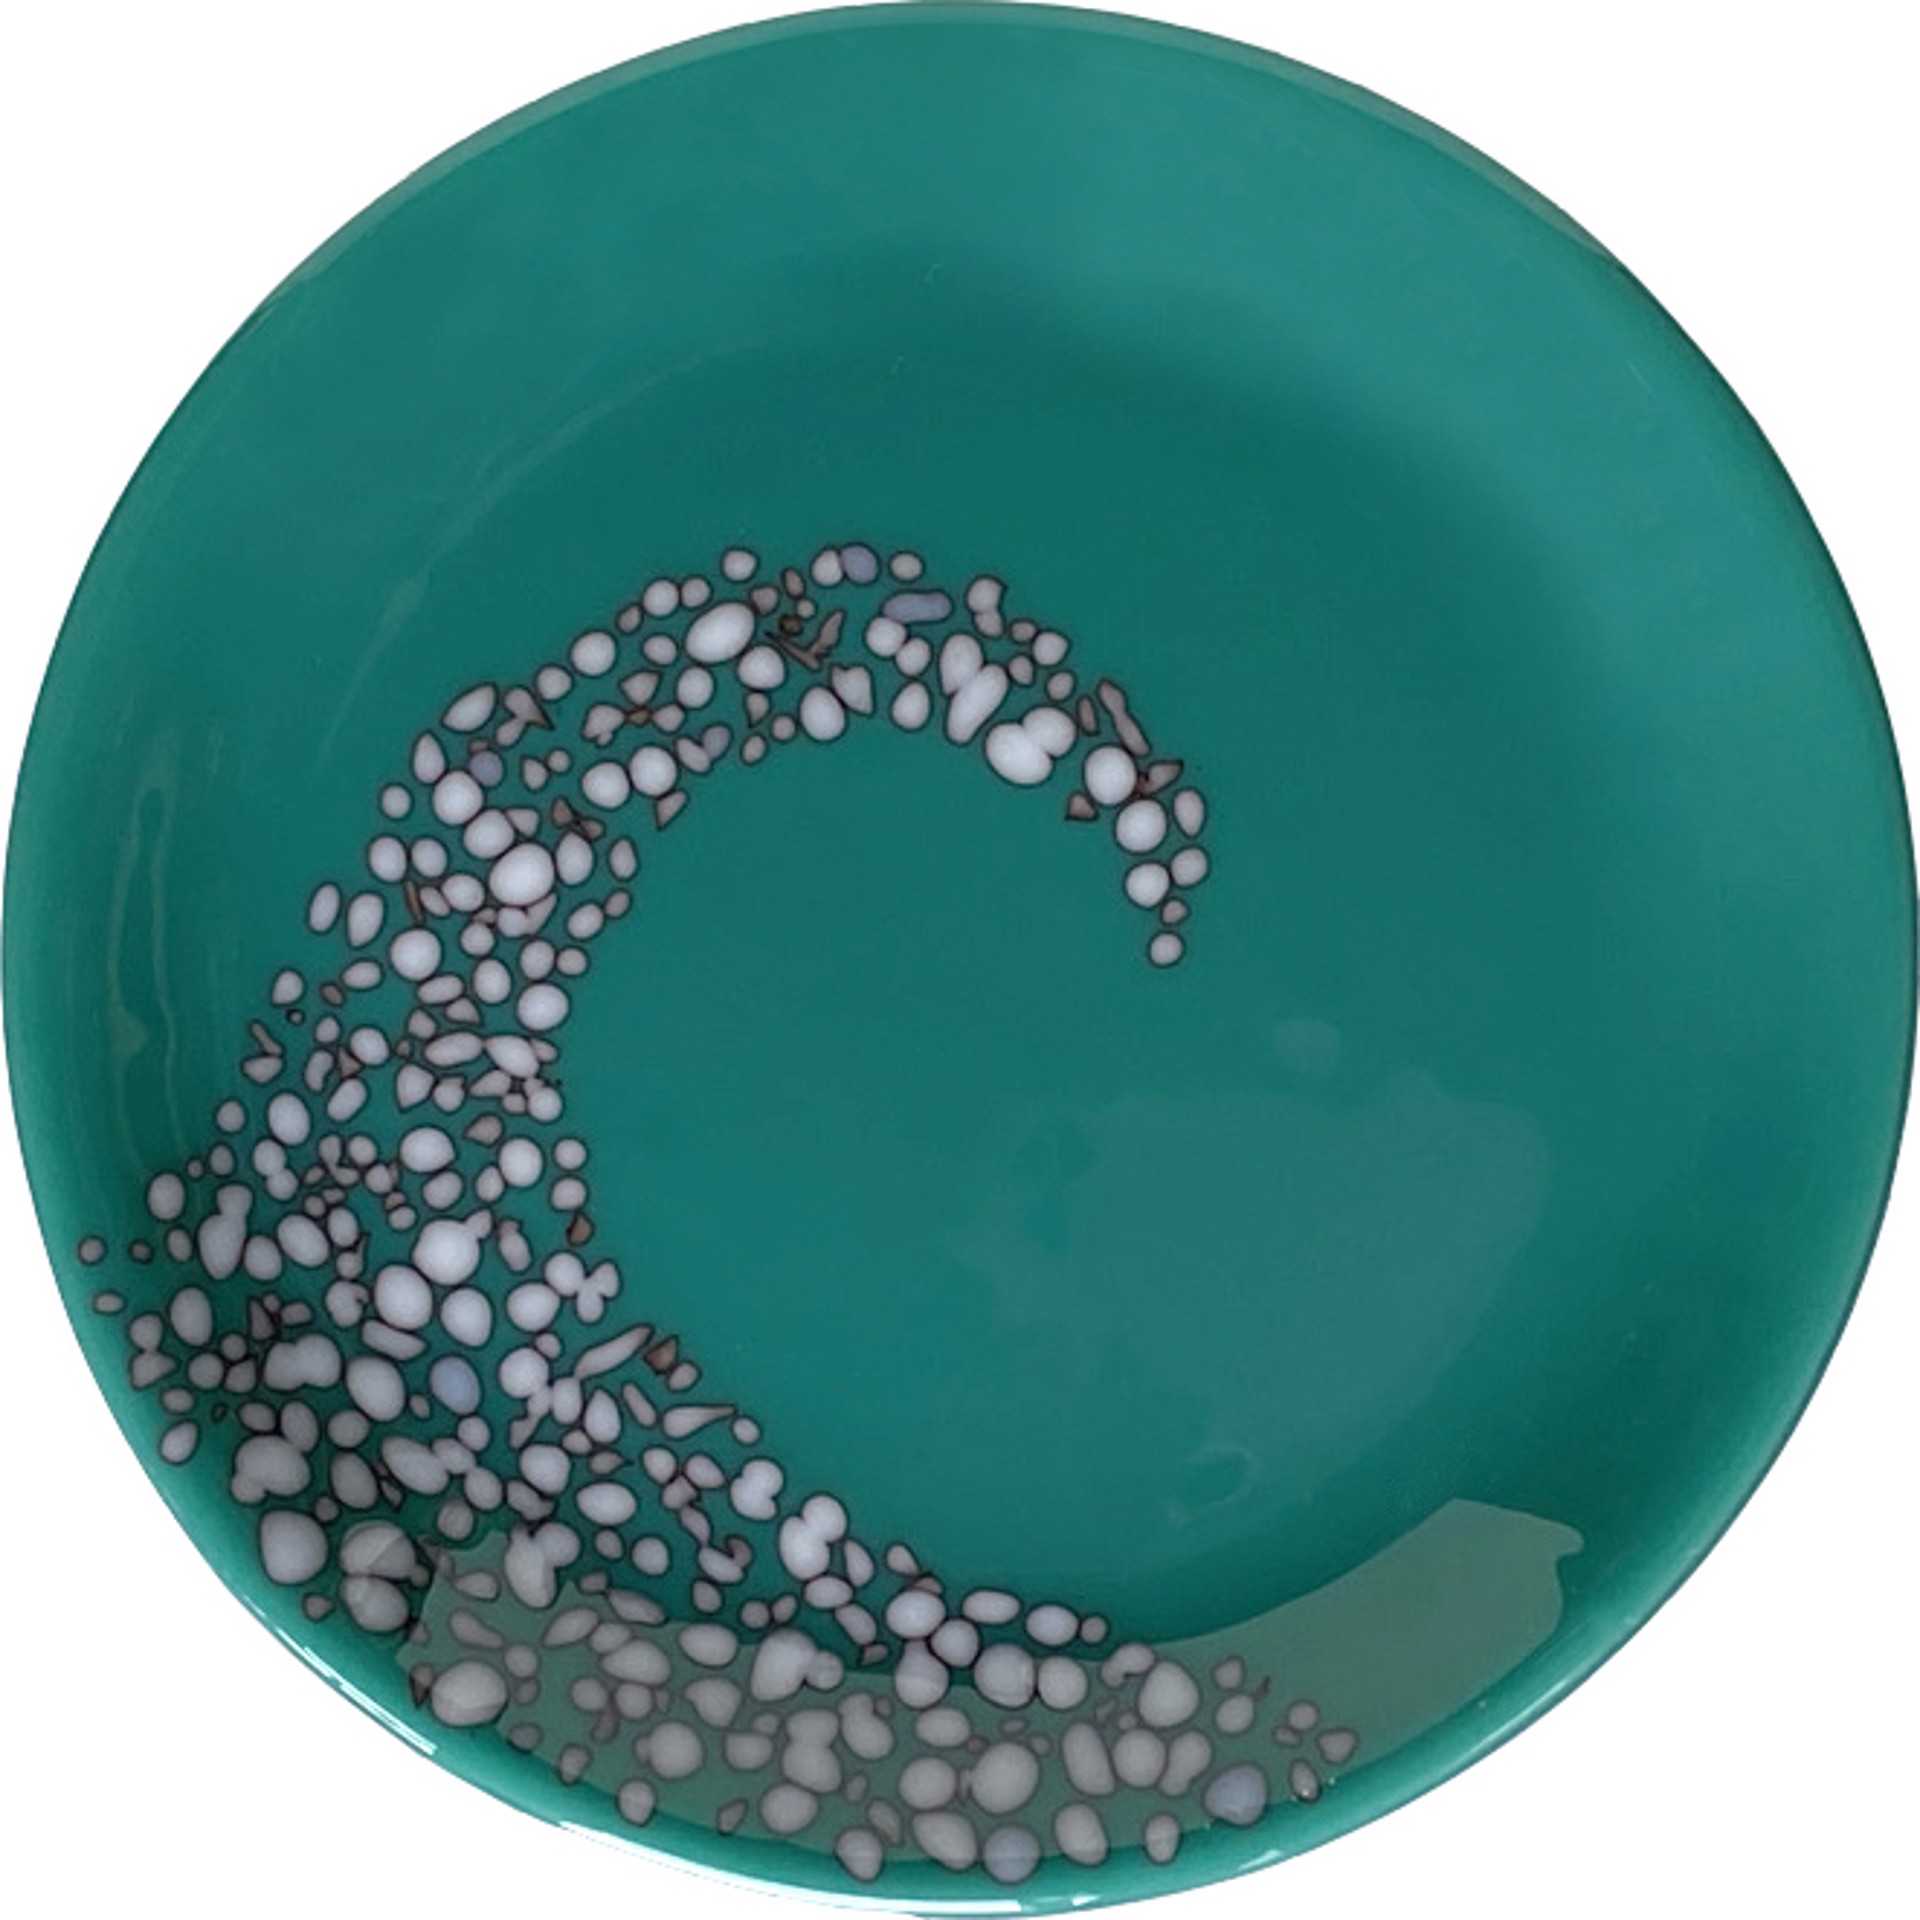 Teal Green and White Reaction "Wave" Plate by Jennifer Welch